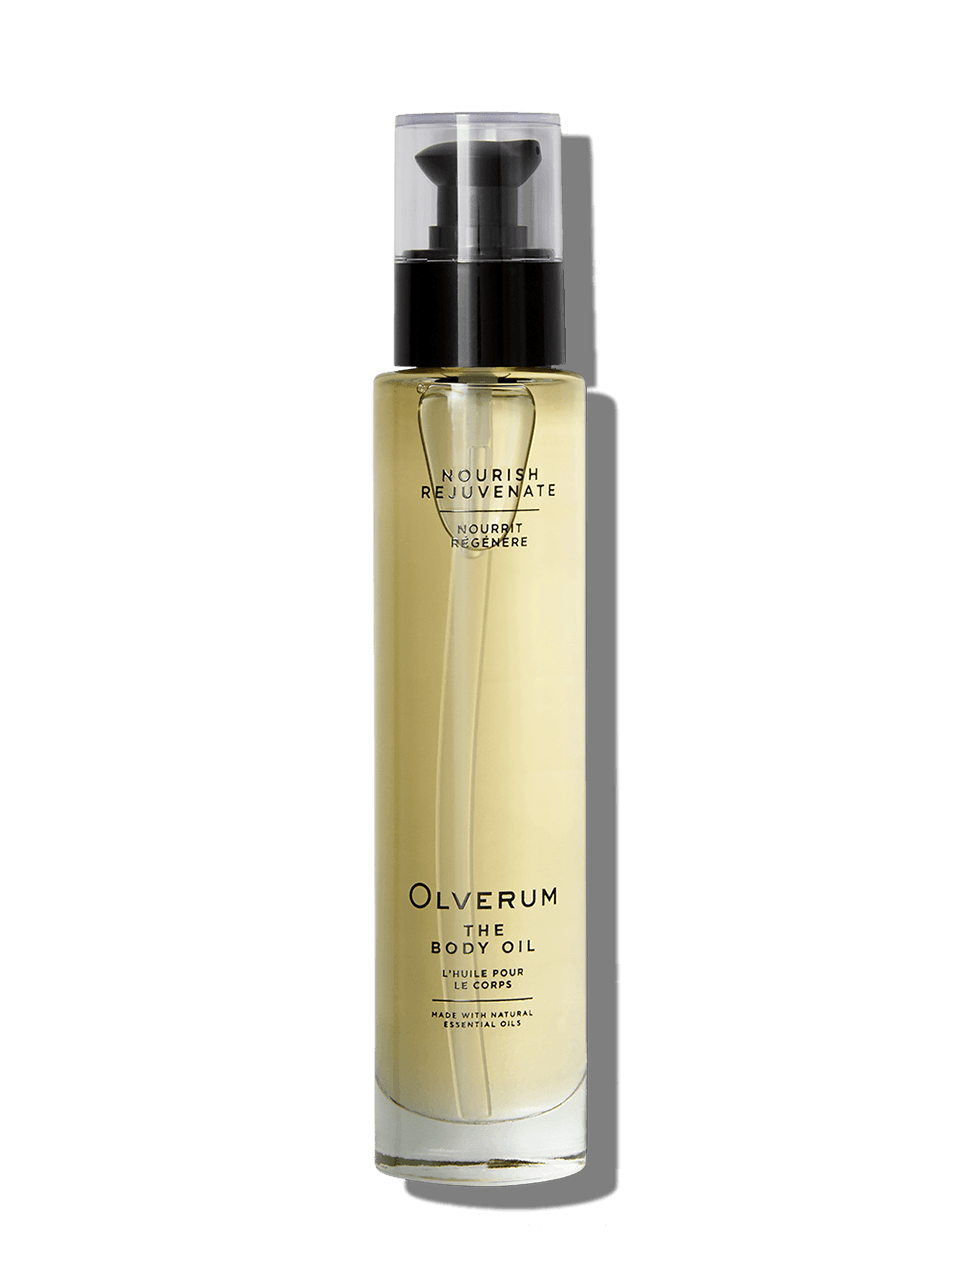  Olverum Firming Body Oil - Luxury Skin Tightening Oil 100ml  Spray - Ethically Sourced Blend of Active Botanical and Essential Oils -  Contouring Collagen Boost for Women And Men 